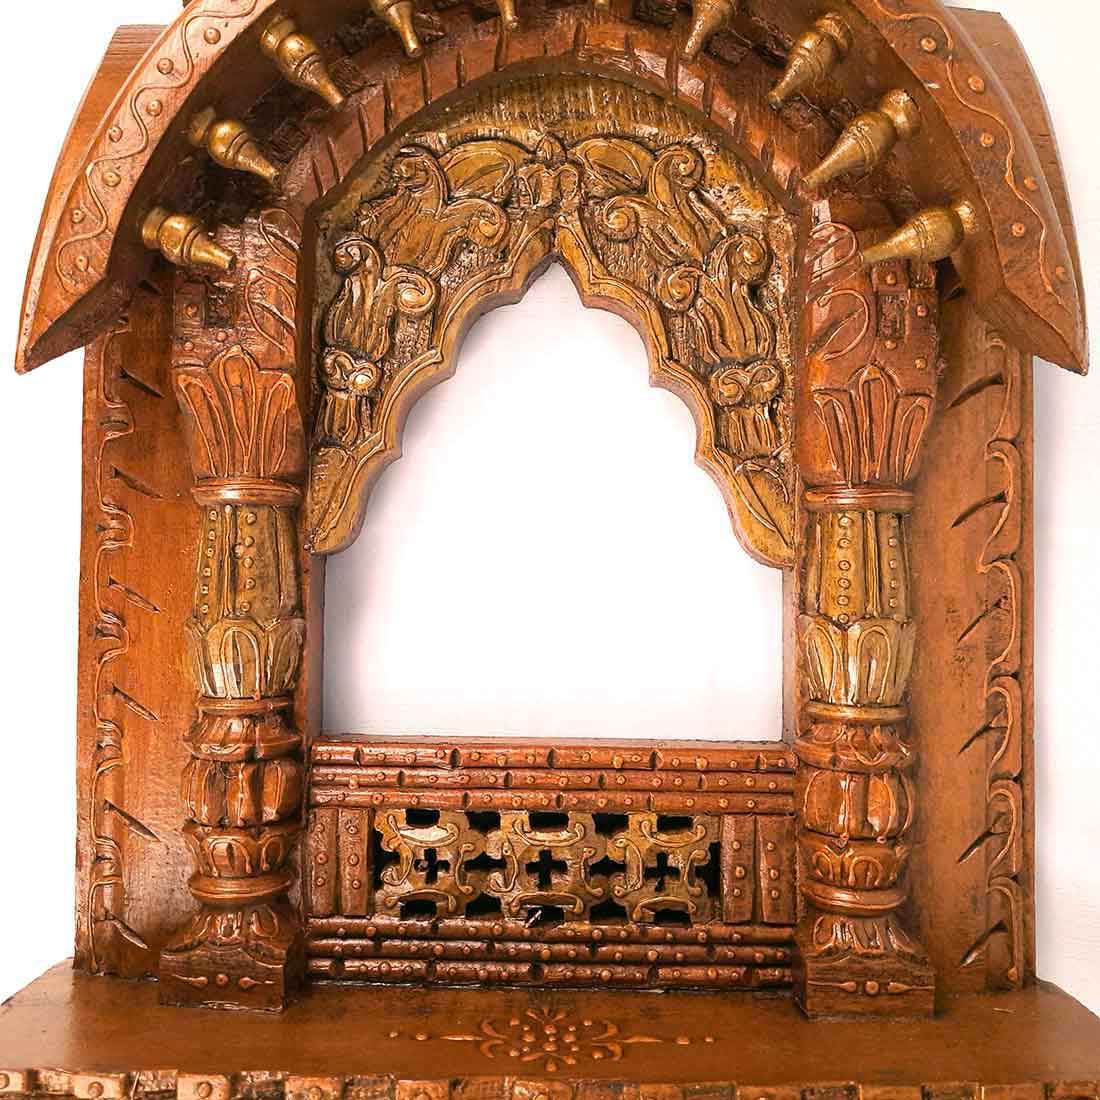 Jharokha Wall hanging - Wall Decor - For Home Decor & Gifts - 27 Inch - Apkamart